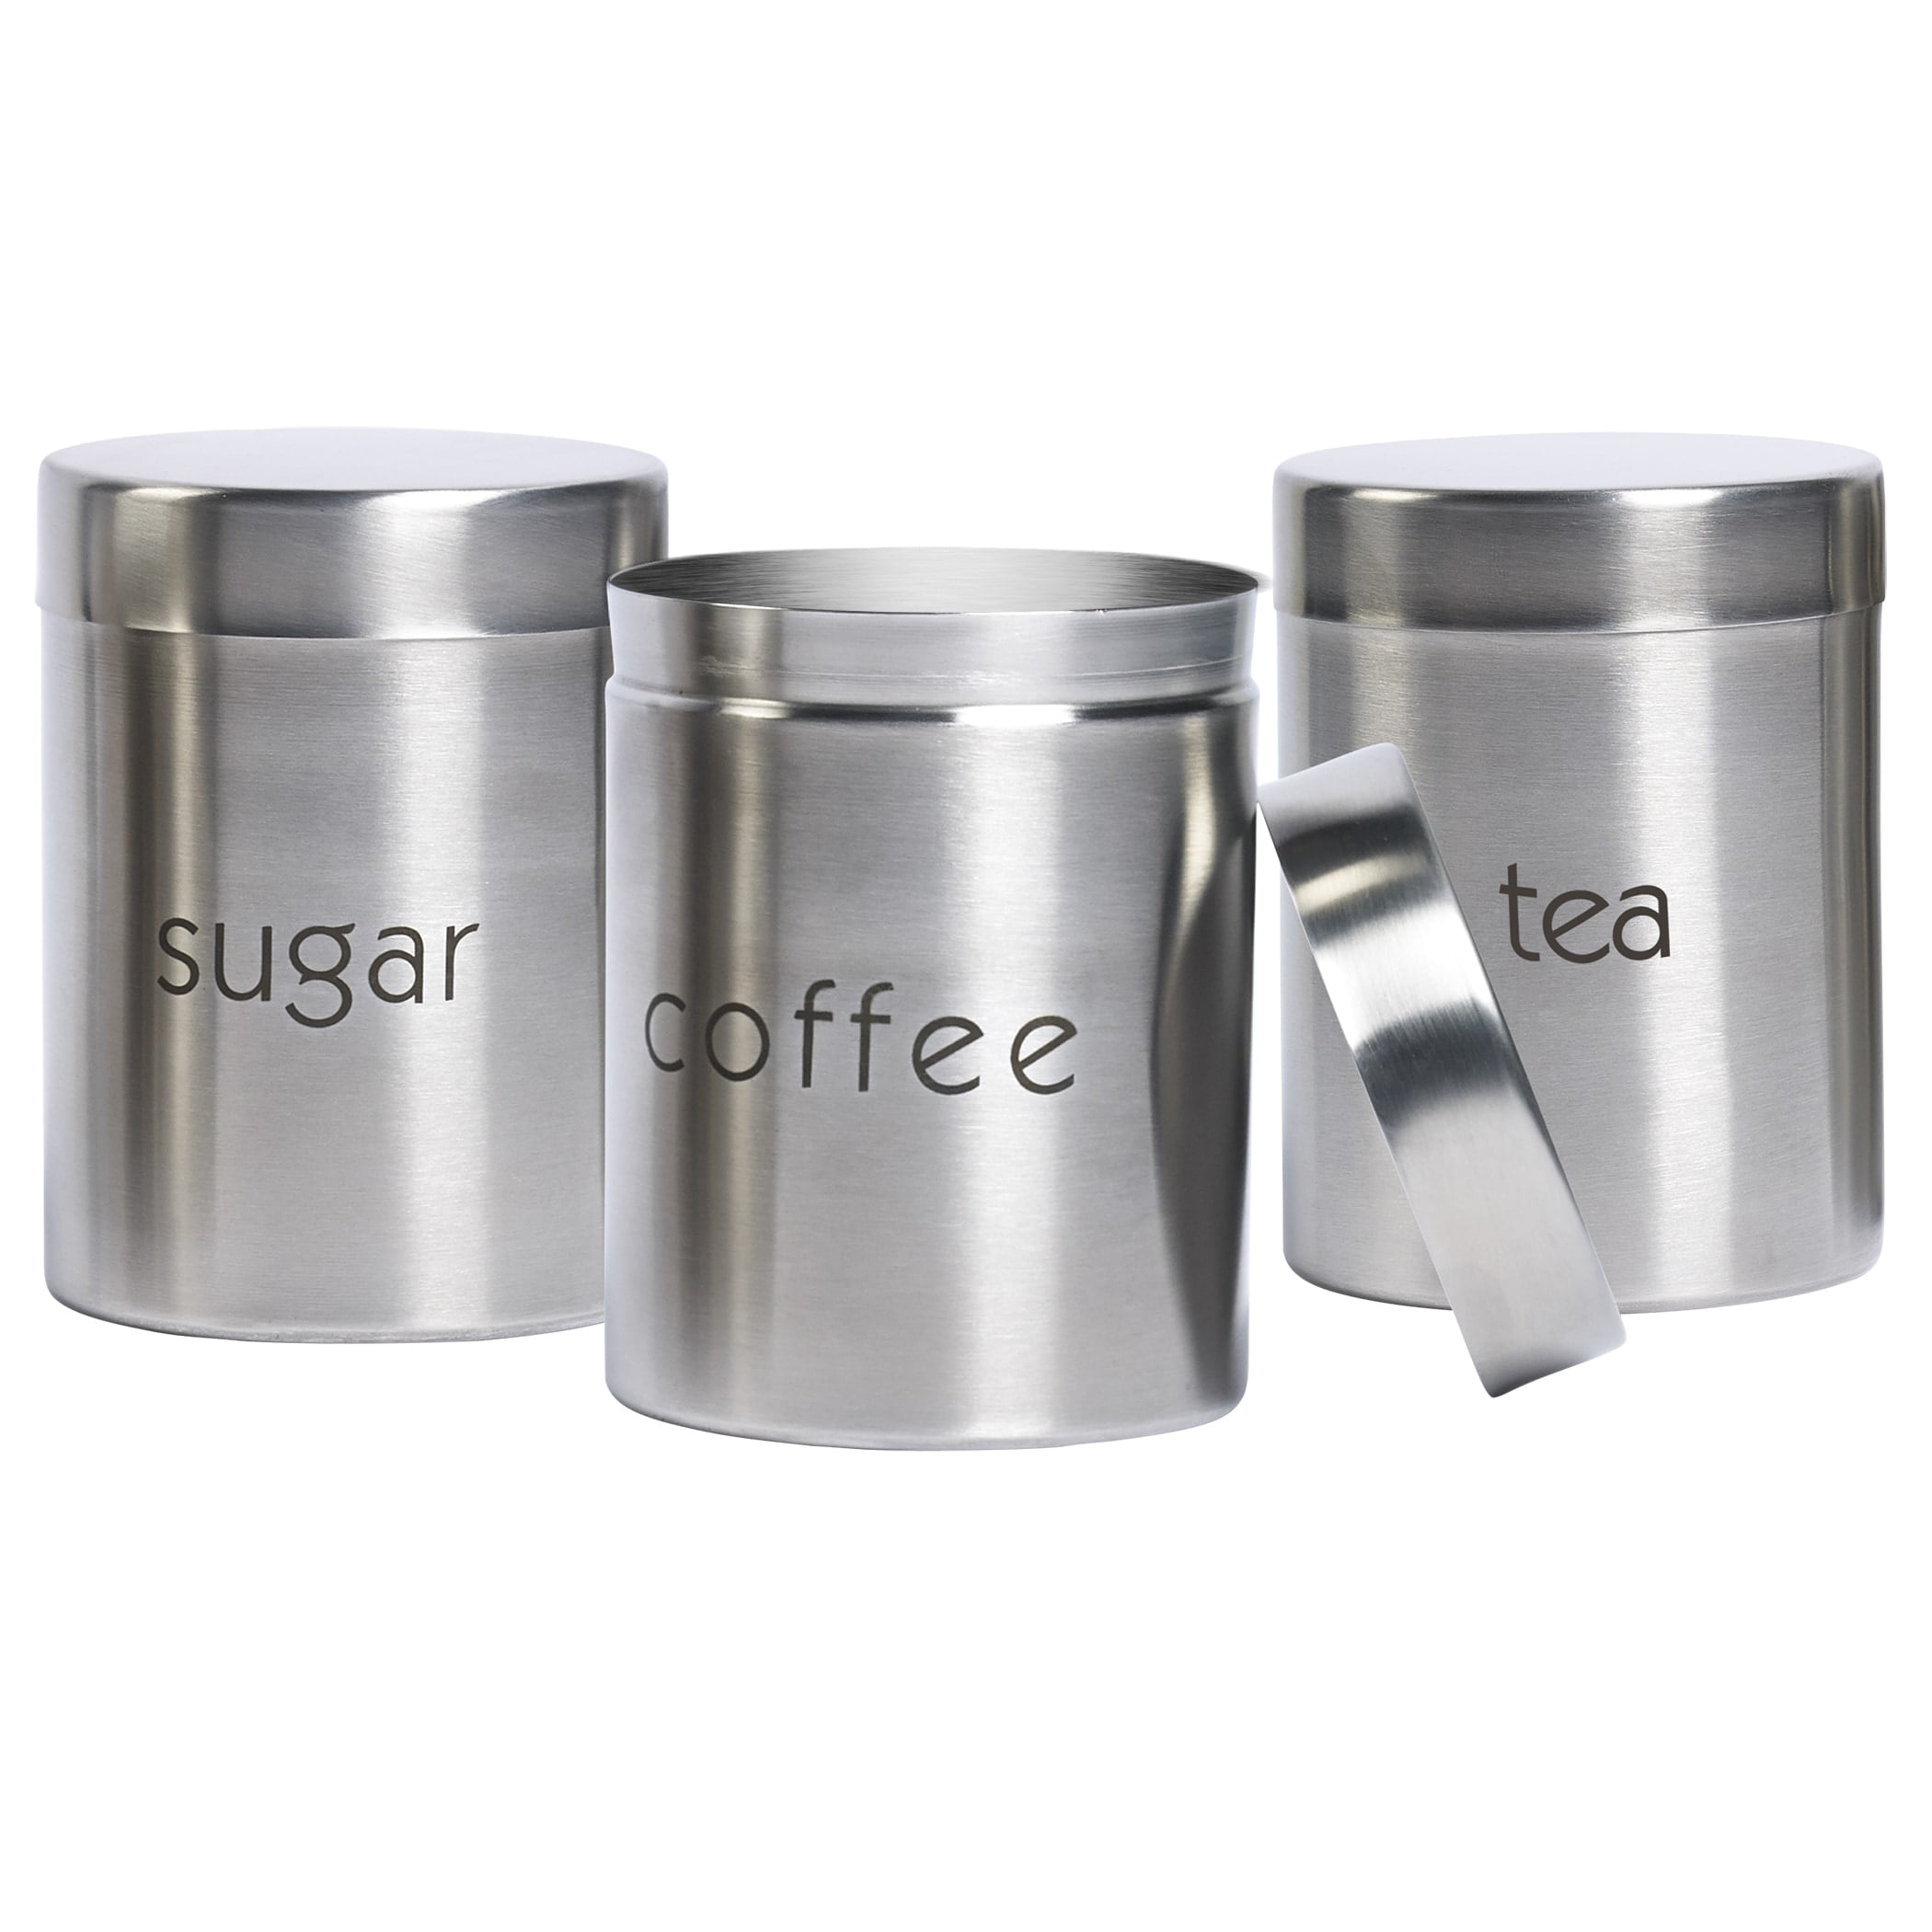 Stainless Steel Tea Tins Canister Canisters Tea Coffee Sugar Storage Household 